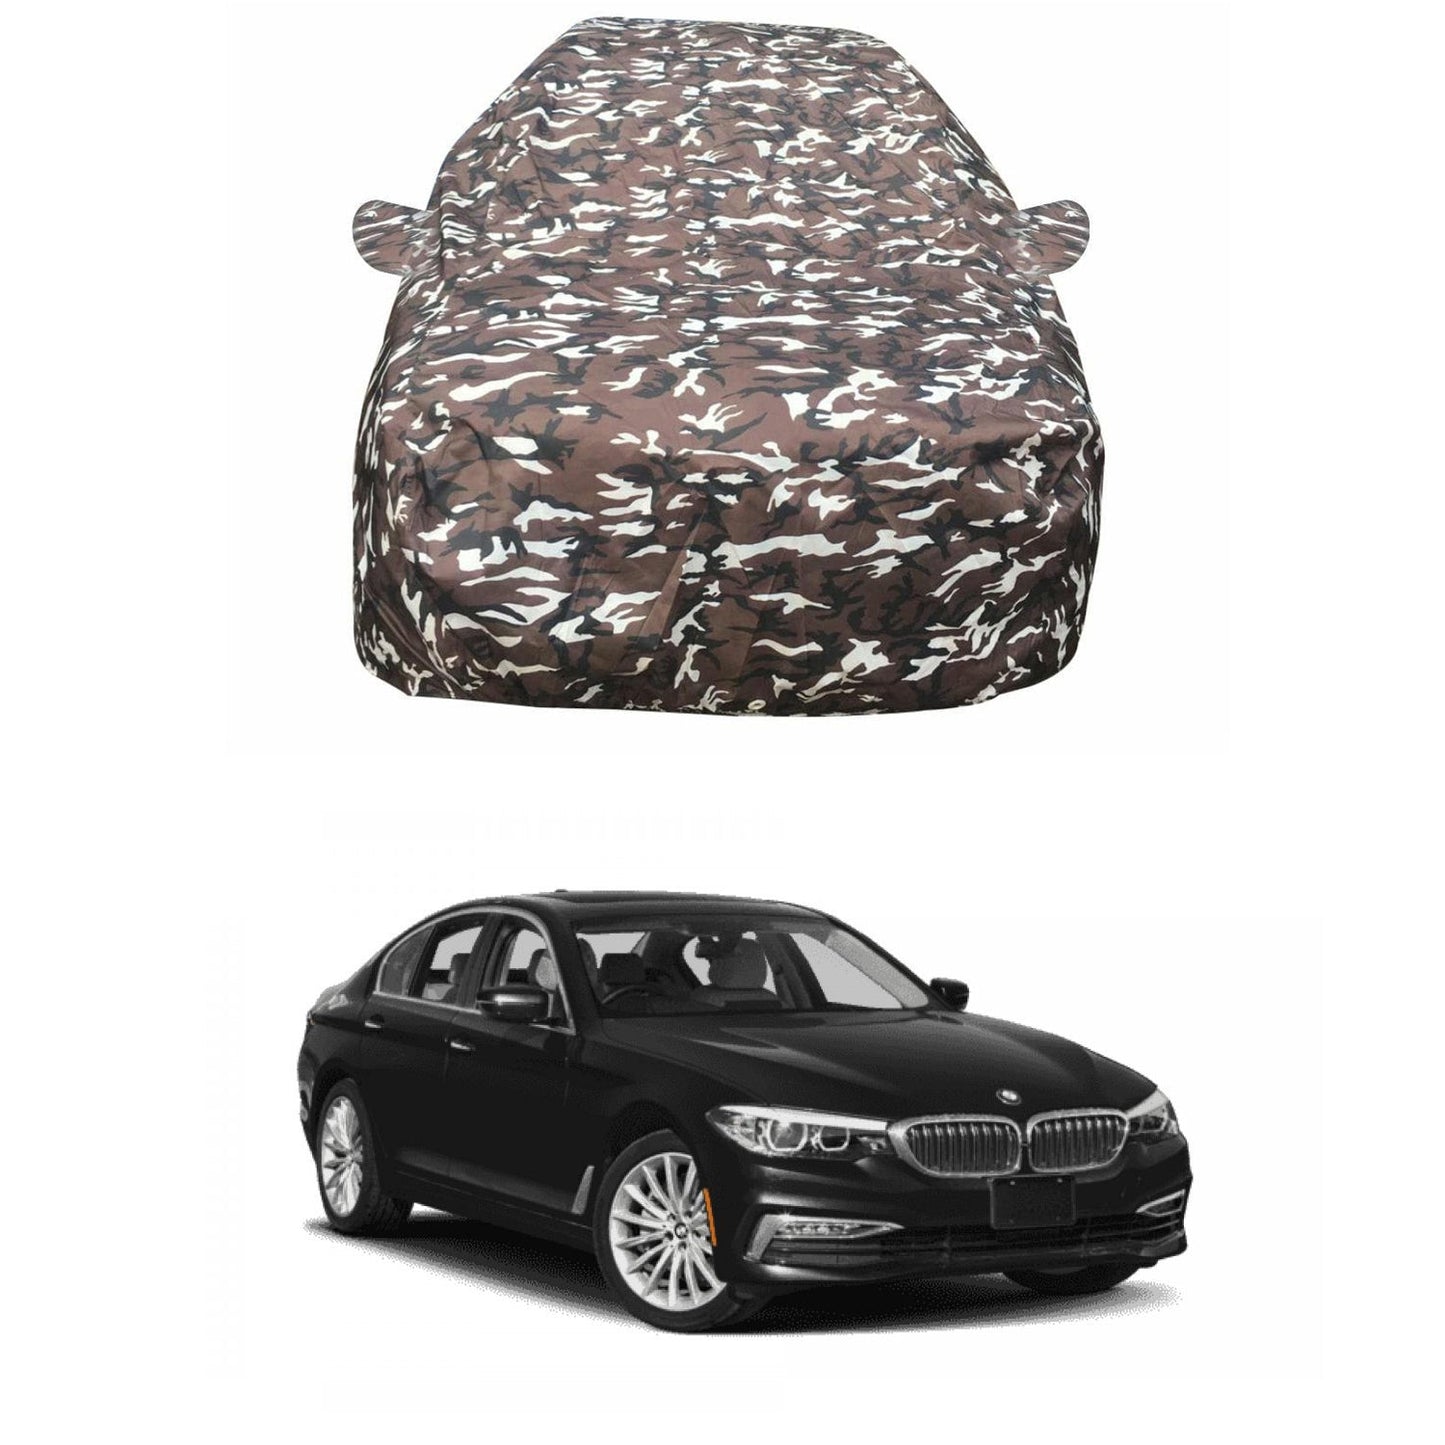 Oshotto Ranger Design Made of 100% Waterproof Fabric Multicolor Car Body Cover with Mirror Pockets For BMW 5 Series